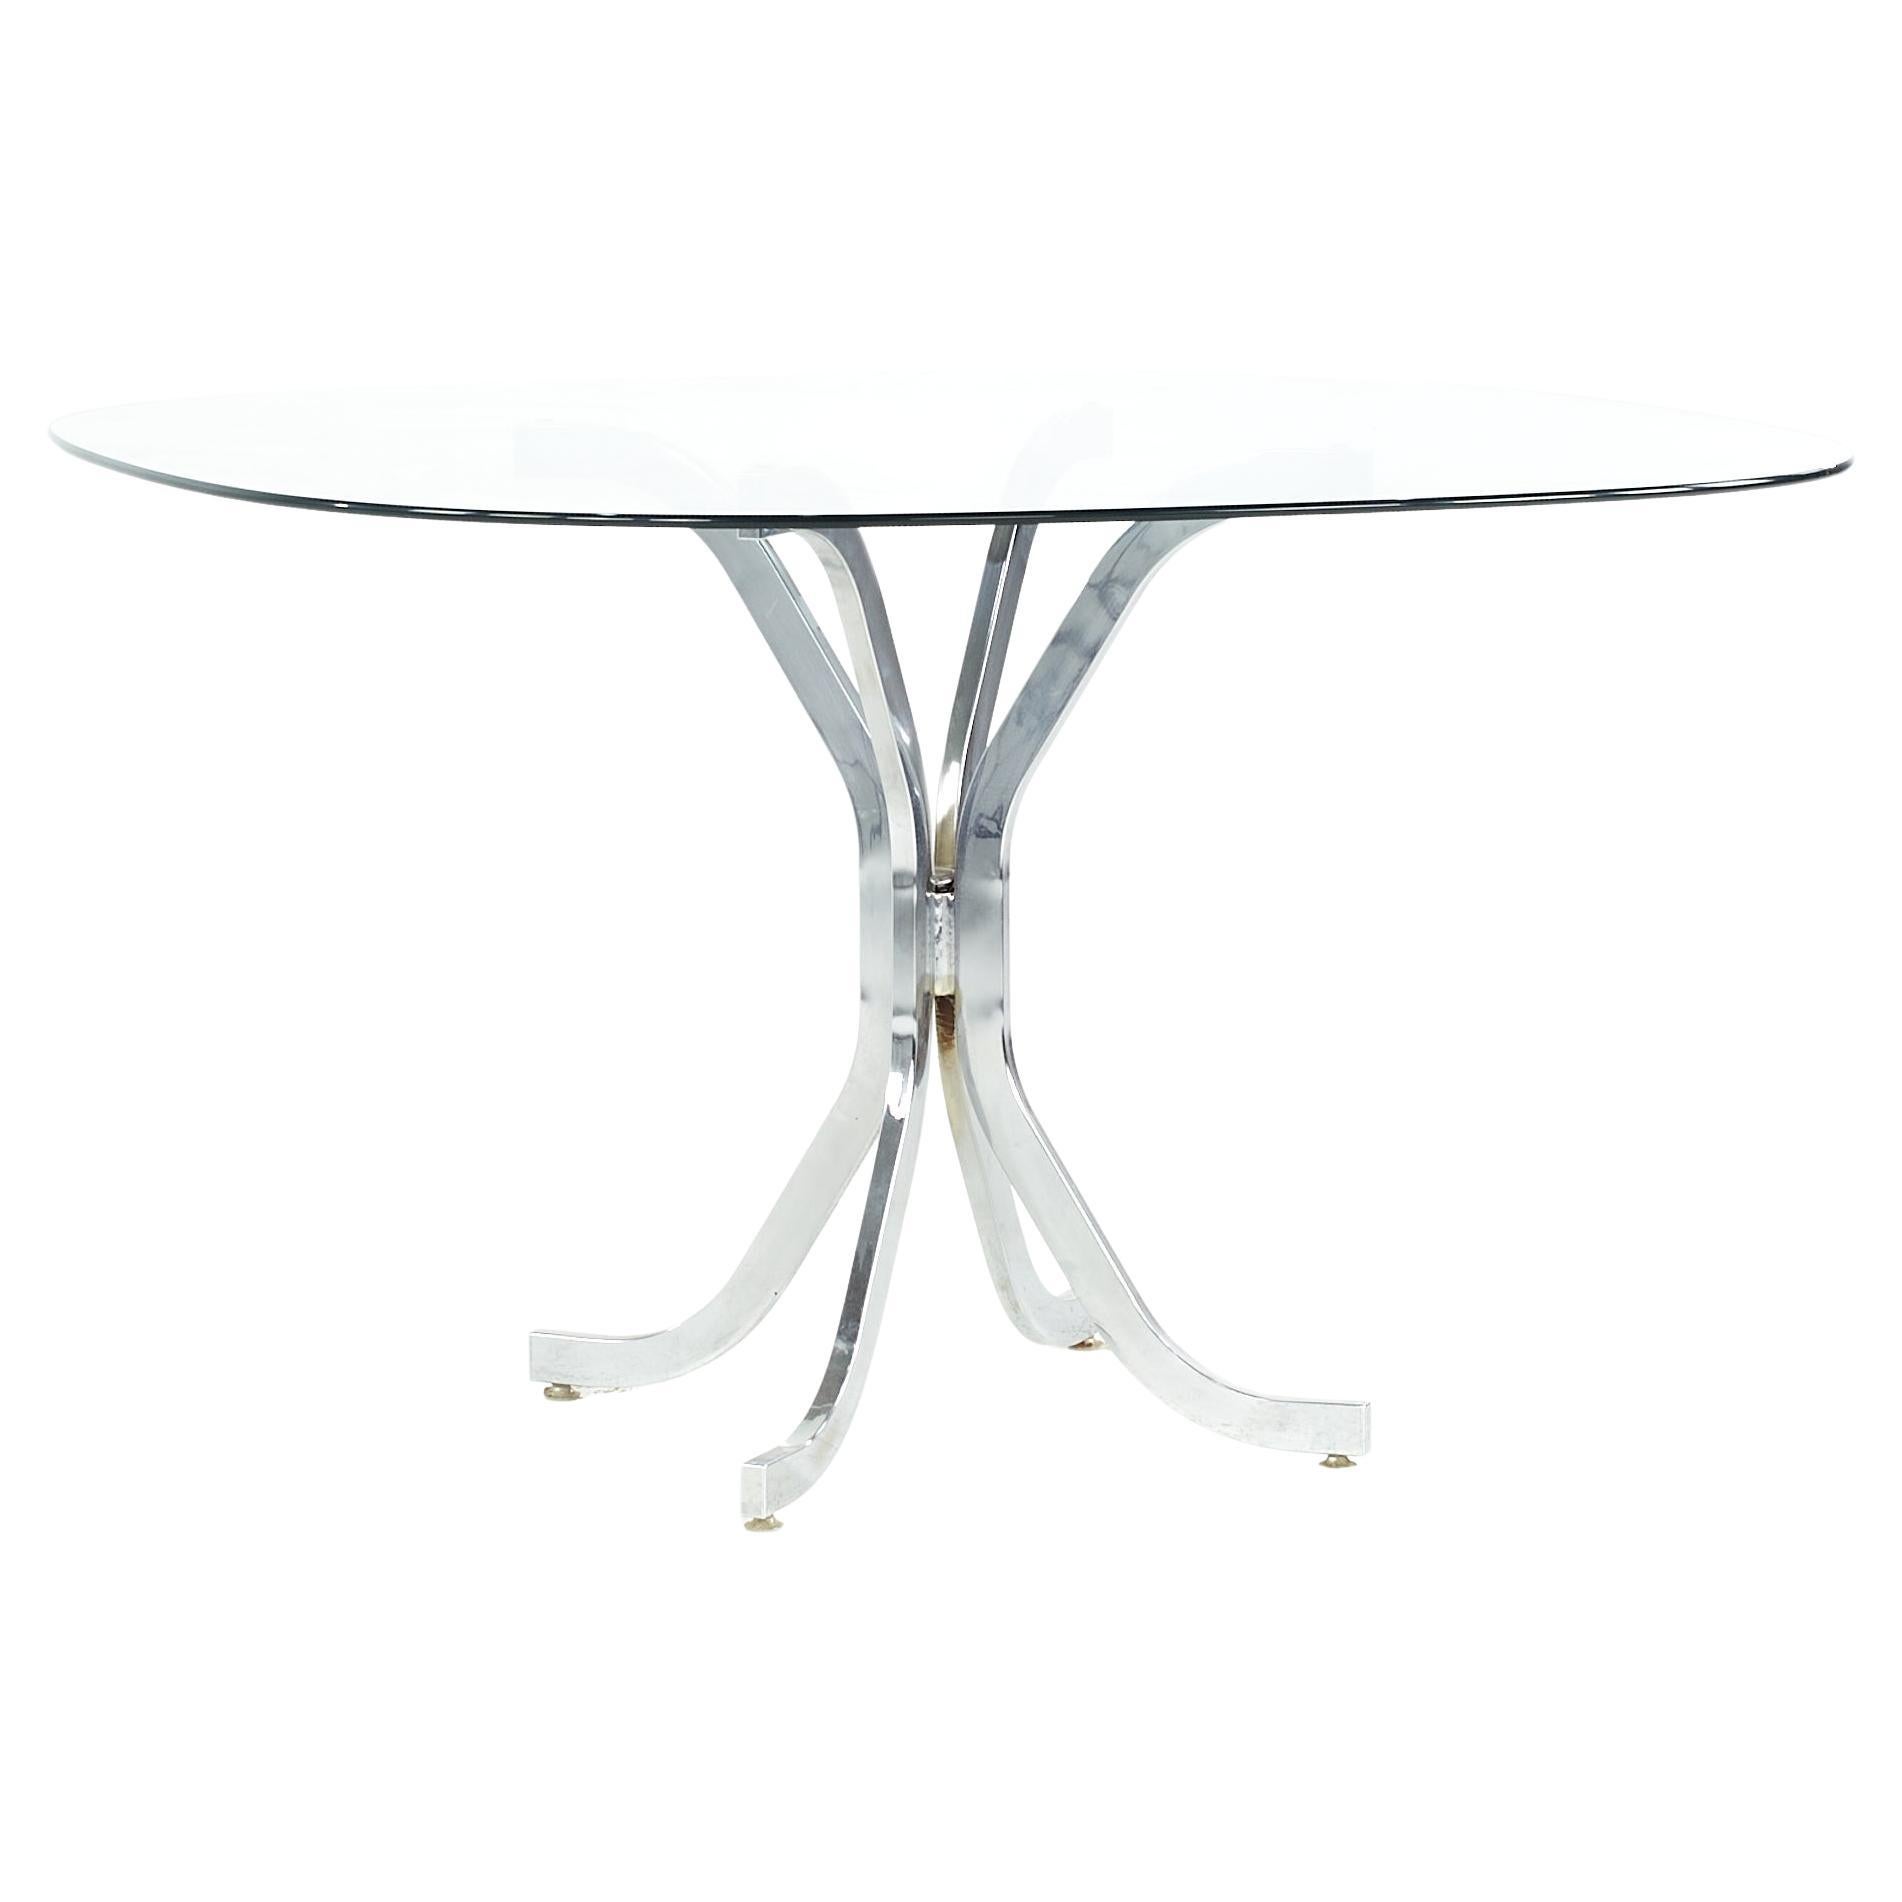 Milo Baughman Style Midcentury Glass and Chrome Dining Room Table For Sale